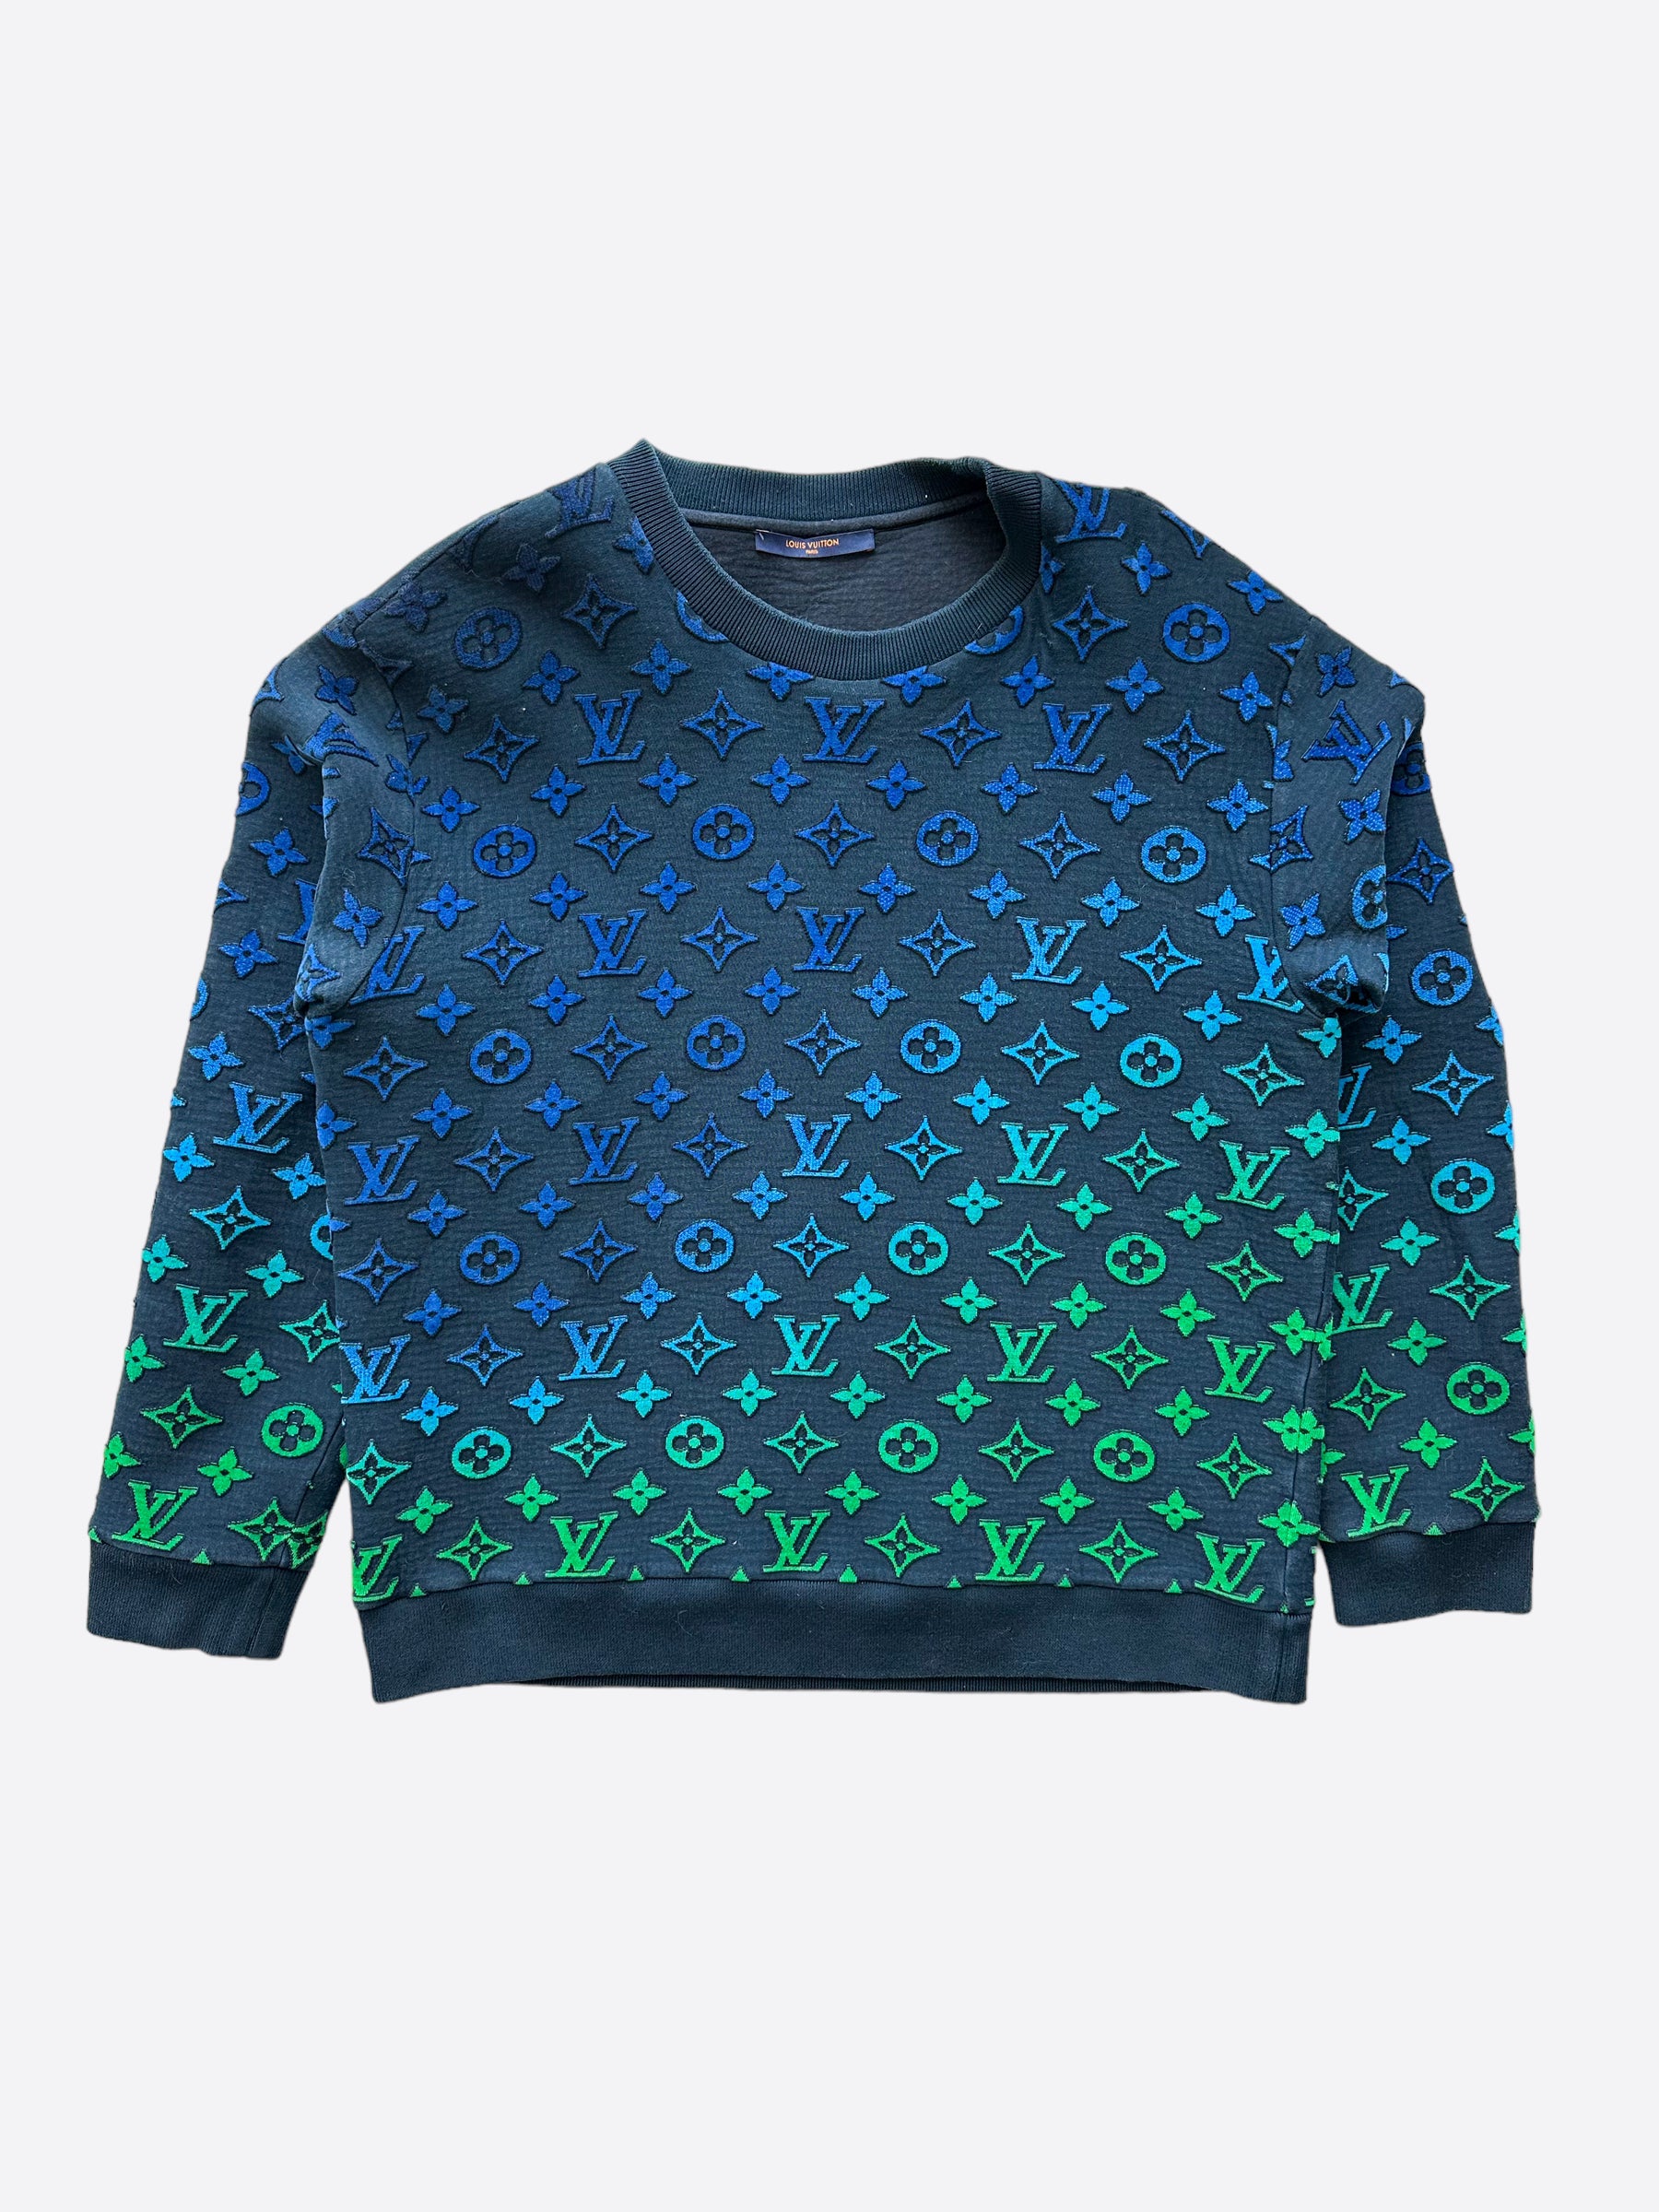 Louis Vuitton 2019 LV Monogram Pullover - Blue Sweaters, Clothing